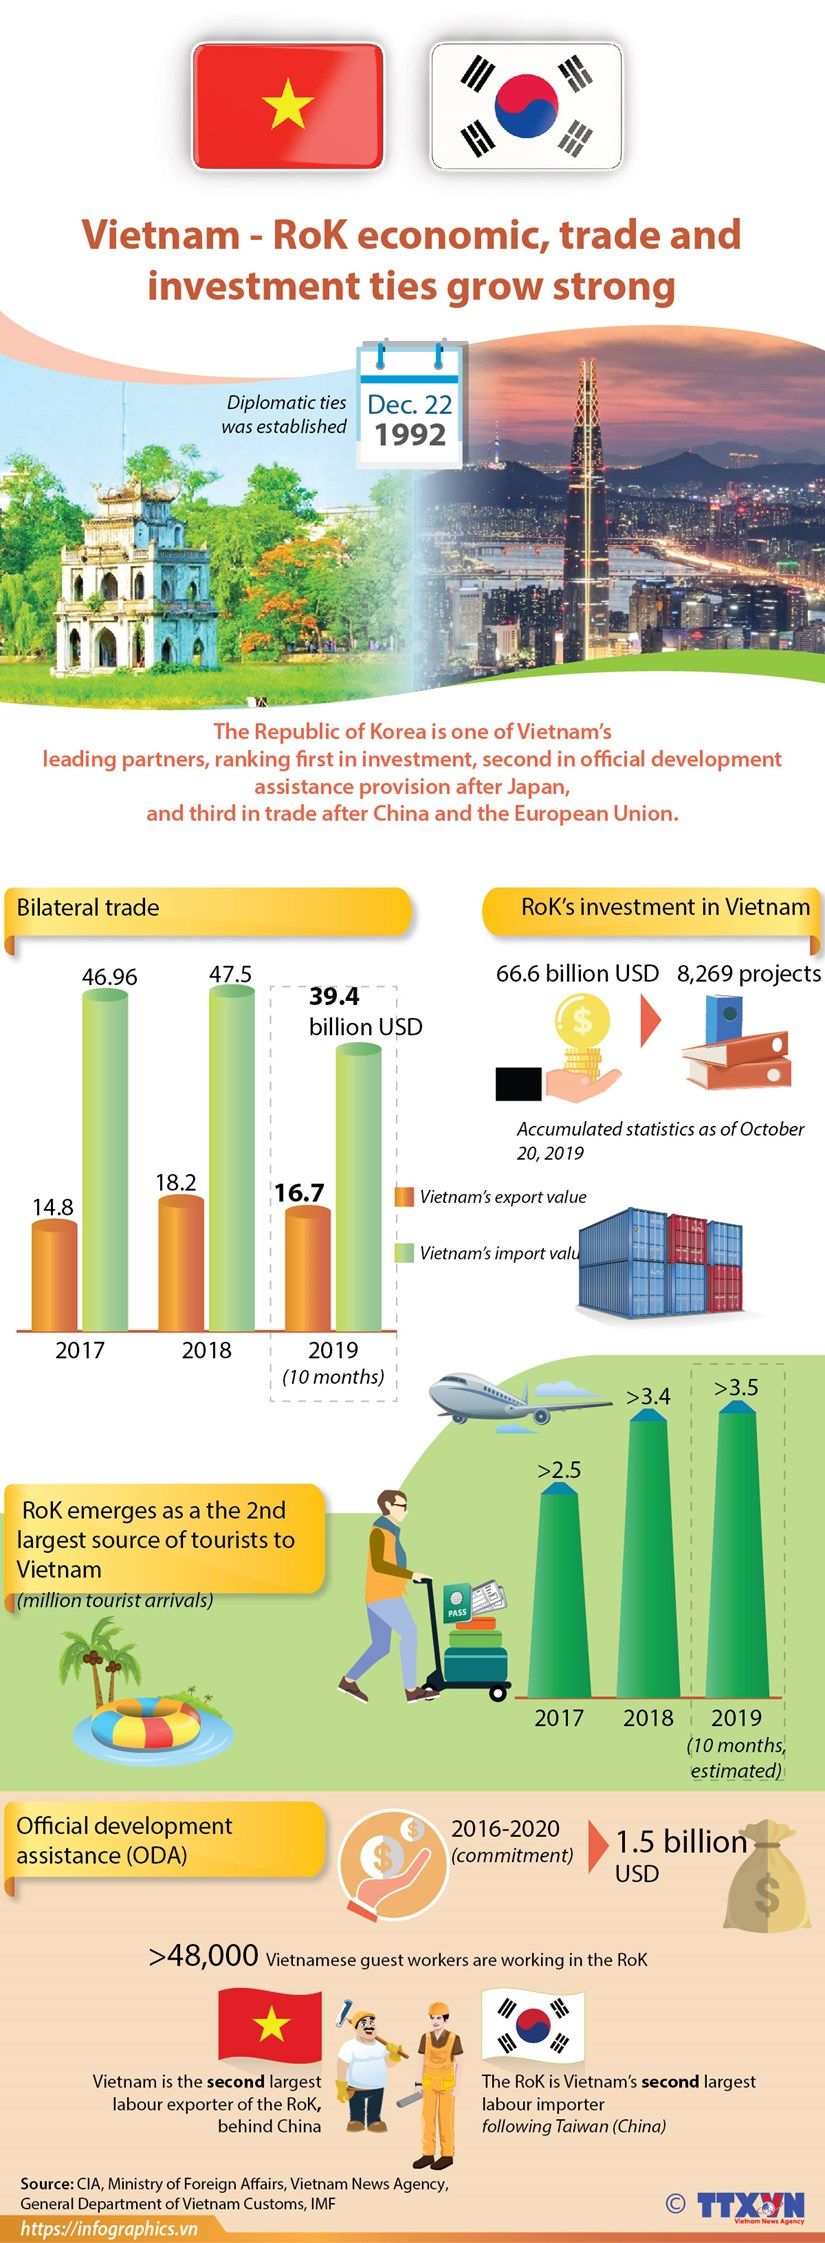 vietnam rok economic trade and investment ties grow strong